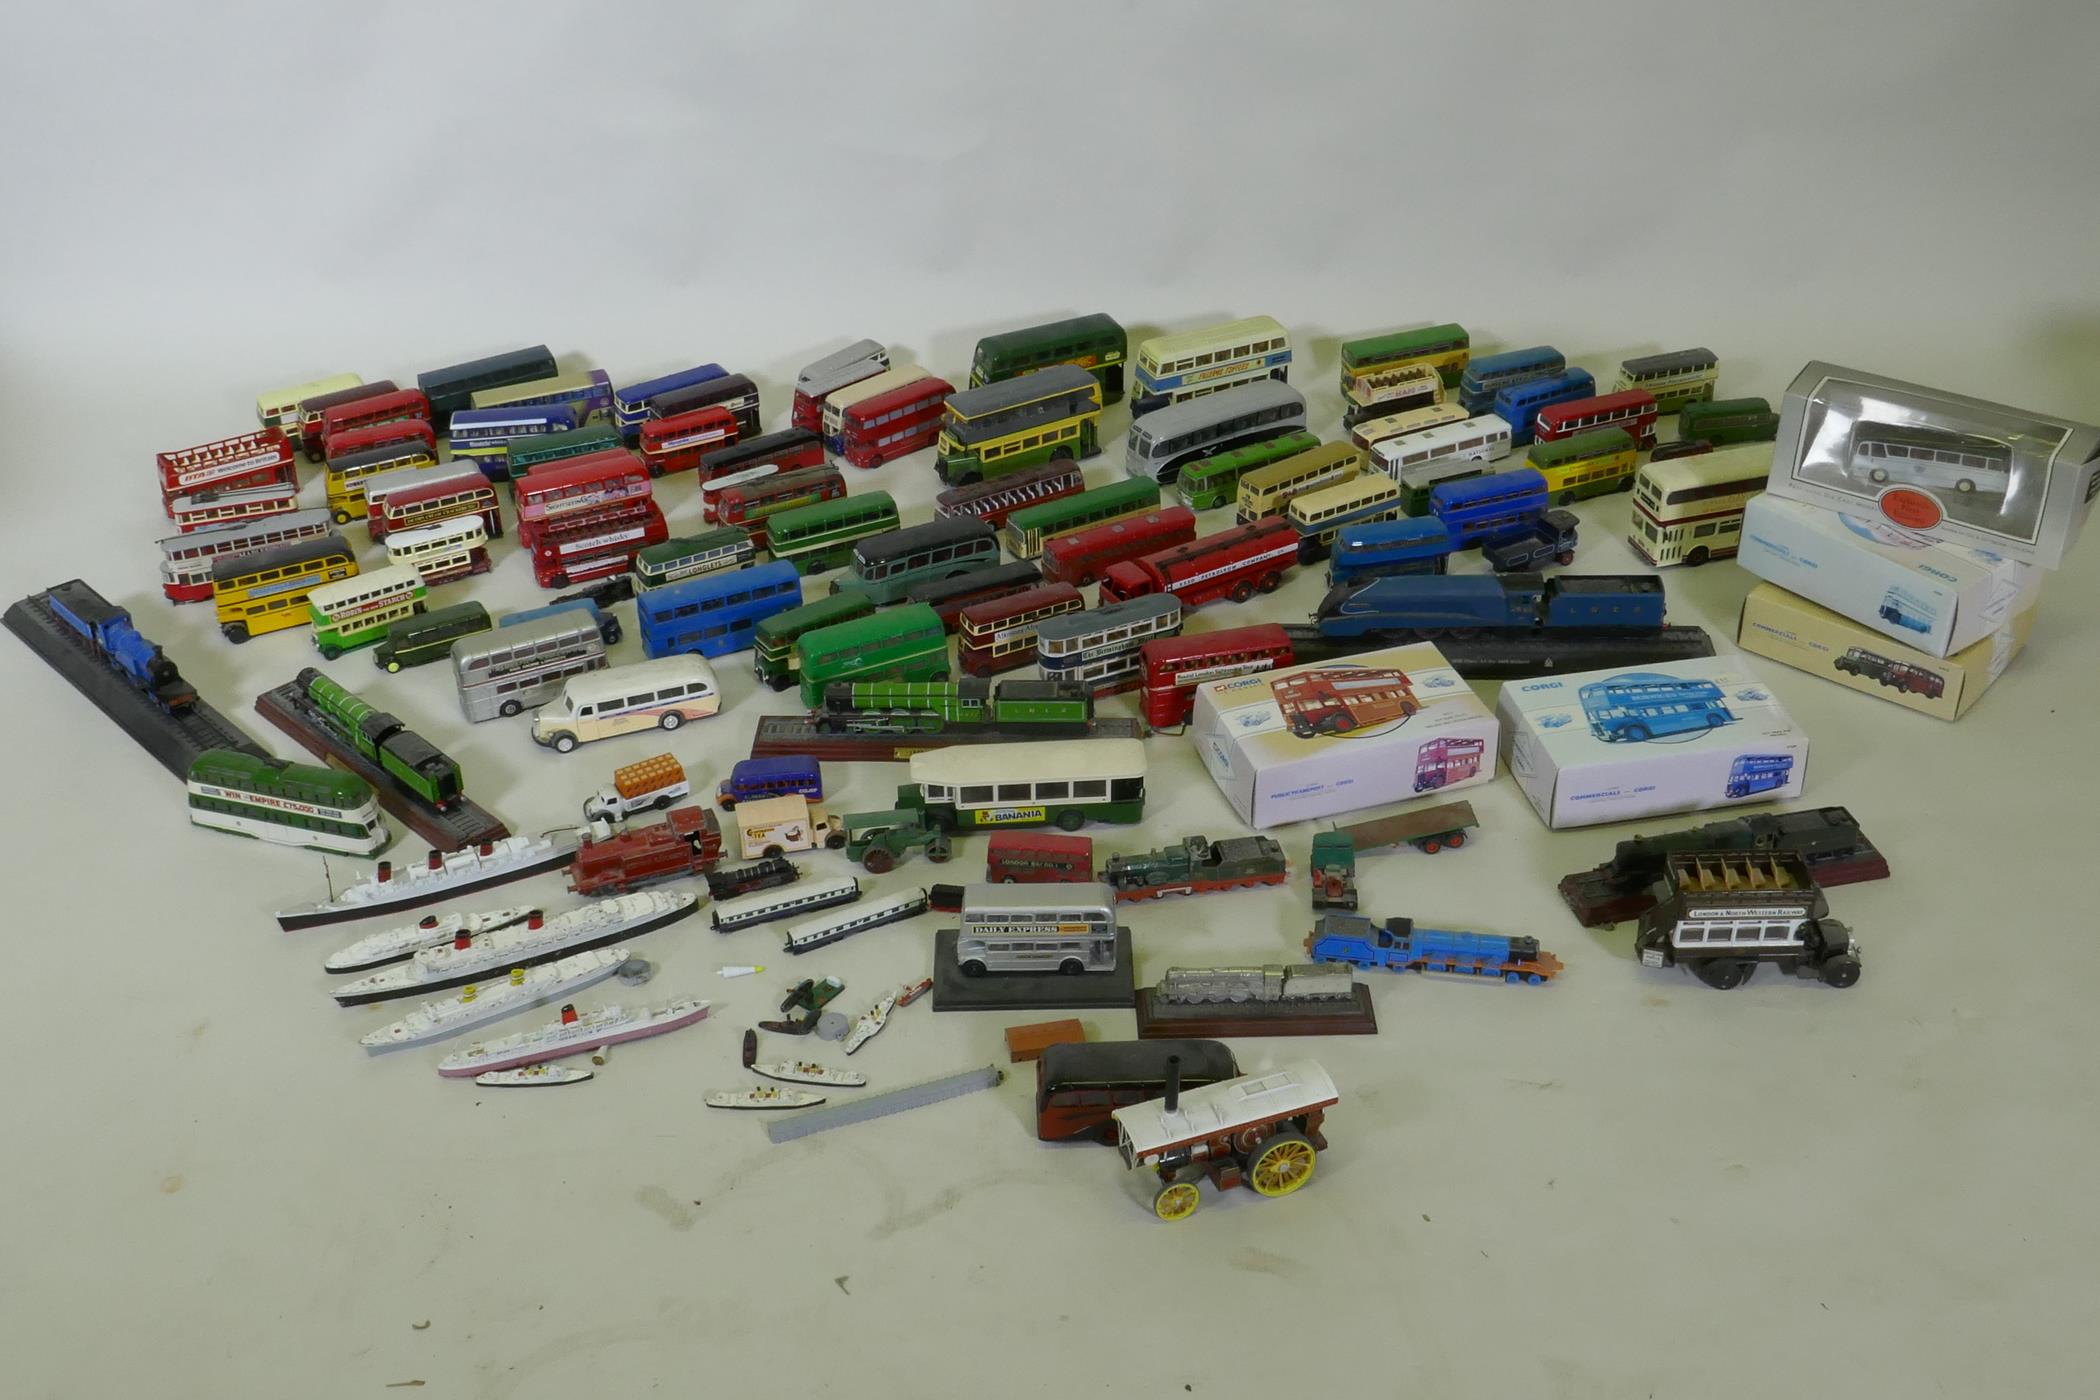 A quantity of collector's die cast model buses, trains, ships etc